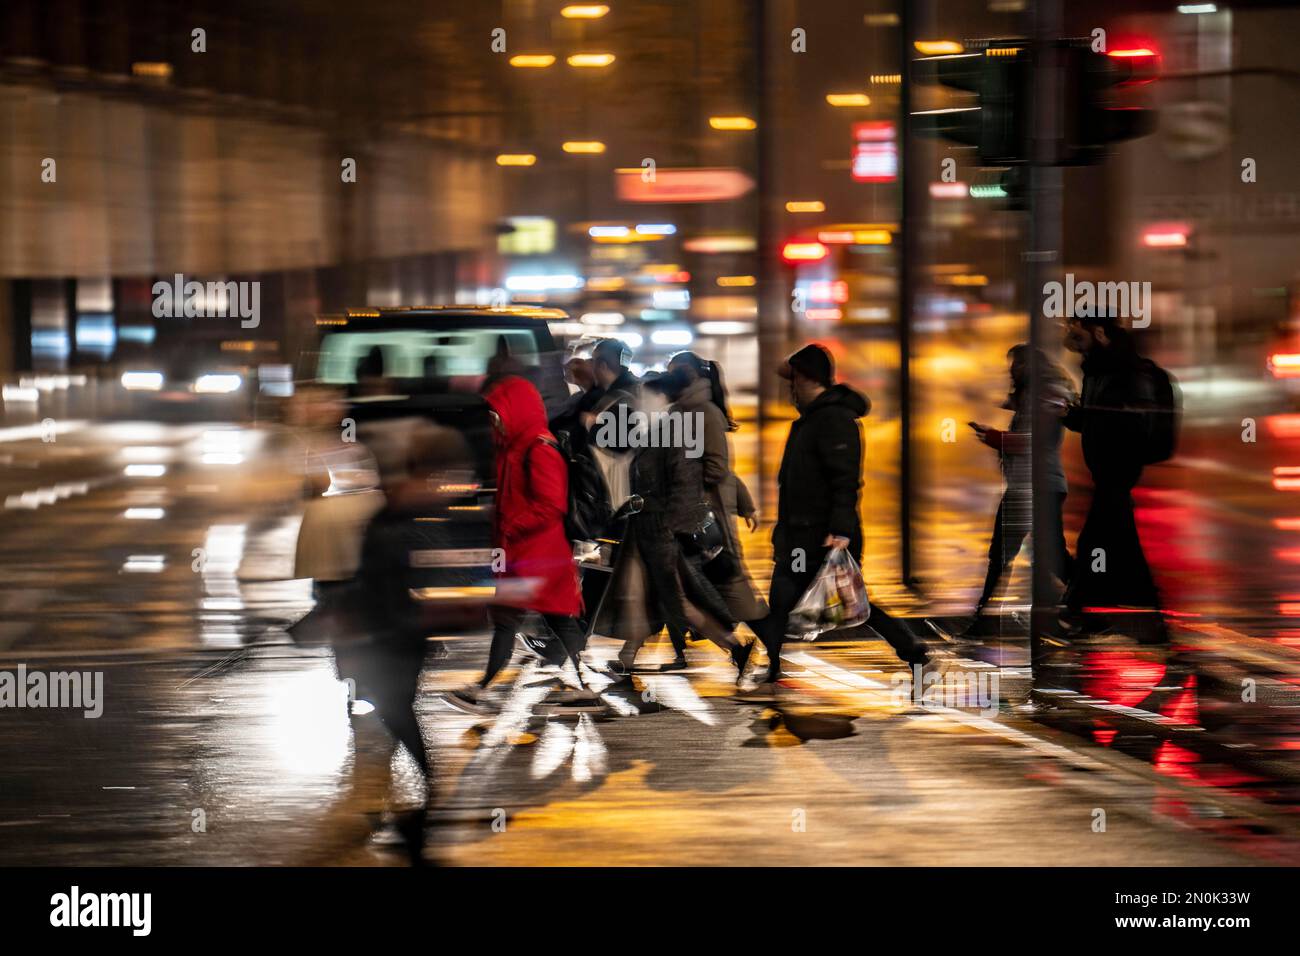 Passers-by at a pedestrian crossing, at the main station, rainy weather, city centre, in the evening, Essen, NRW, Germany, Stock Photo